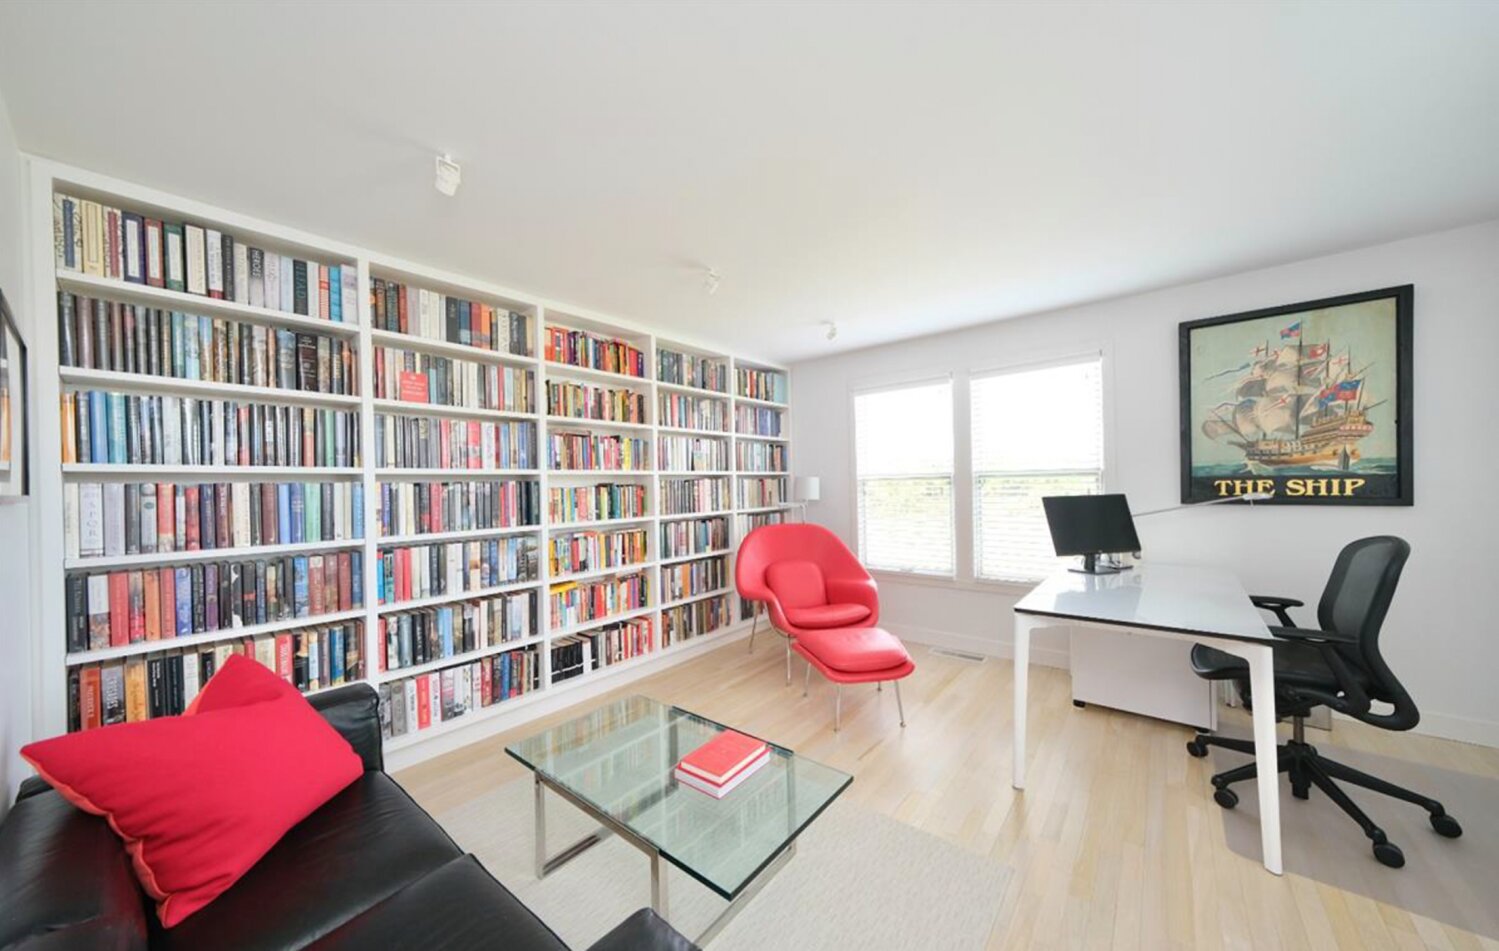 The den/office has a wall of built-in bookshelves, light wood floors and plenty of space to relax or work.